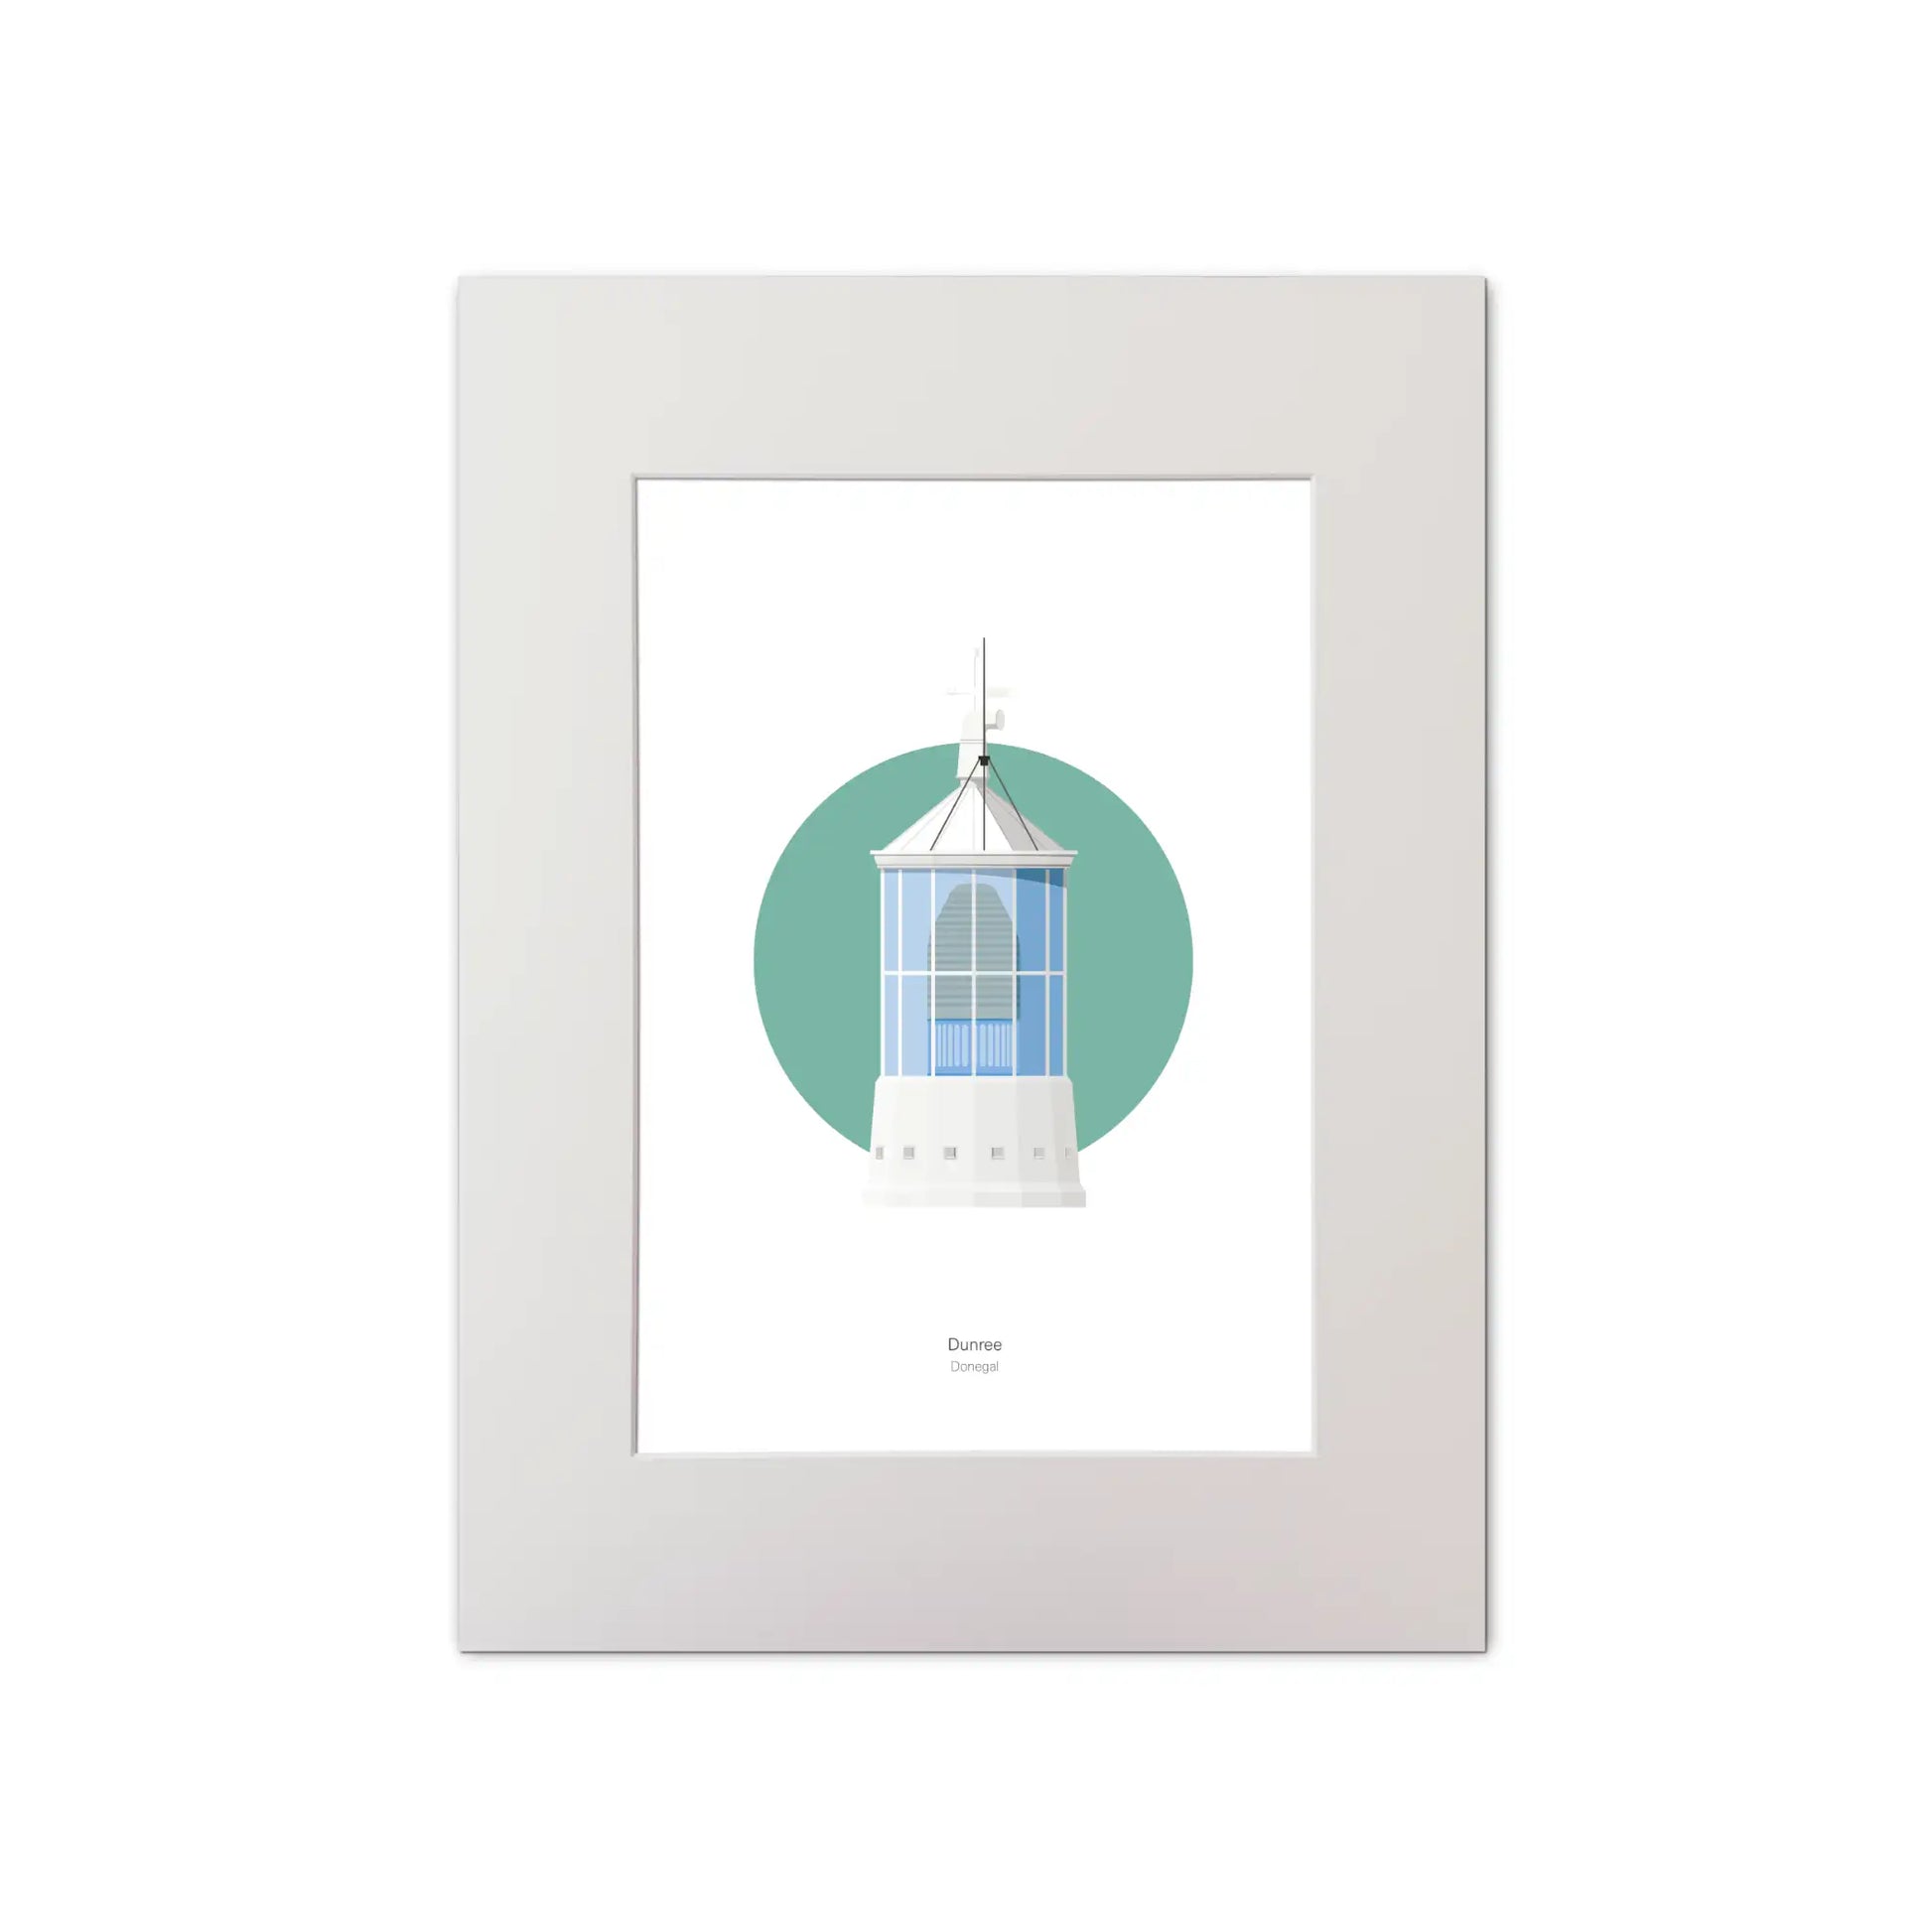 Contemporary graphic illustration of Dunree lighthouse on a white background inside light blue square, mounted and measuring 30x40cm.